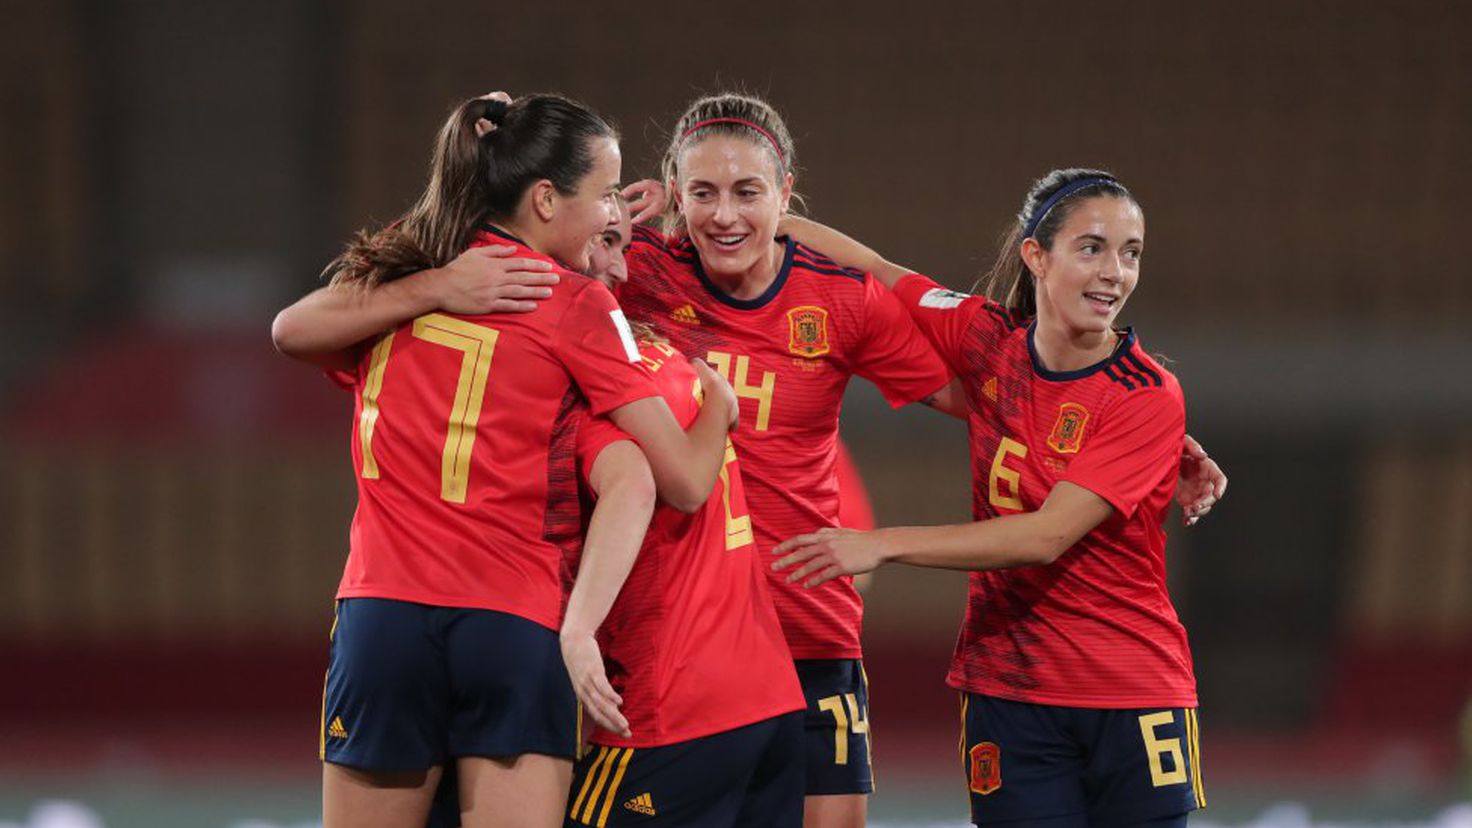 Spain, the country with the fastest growth in sports sponsorship
